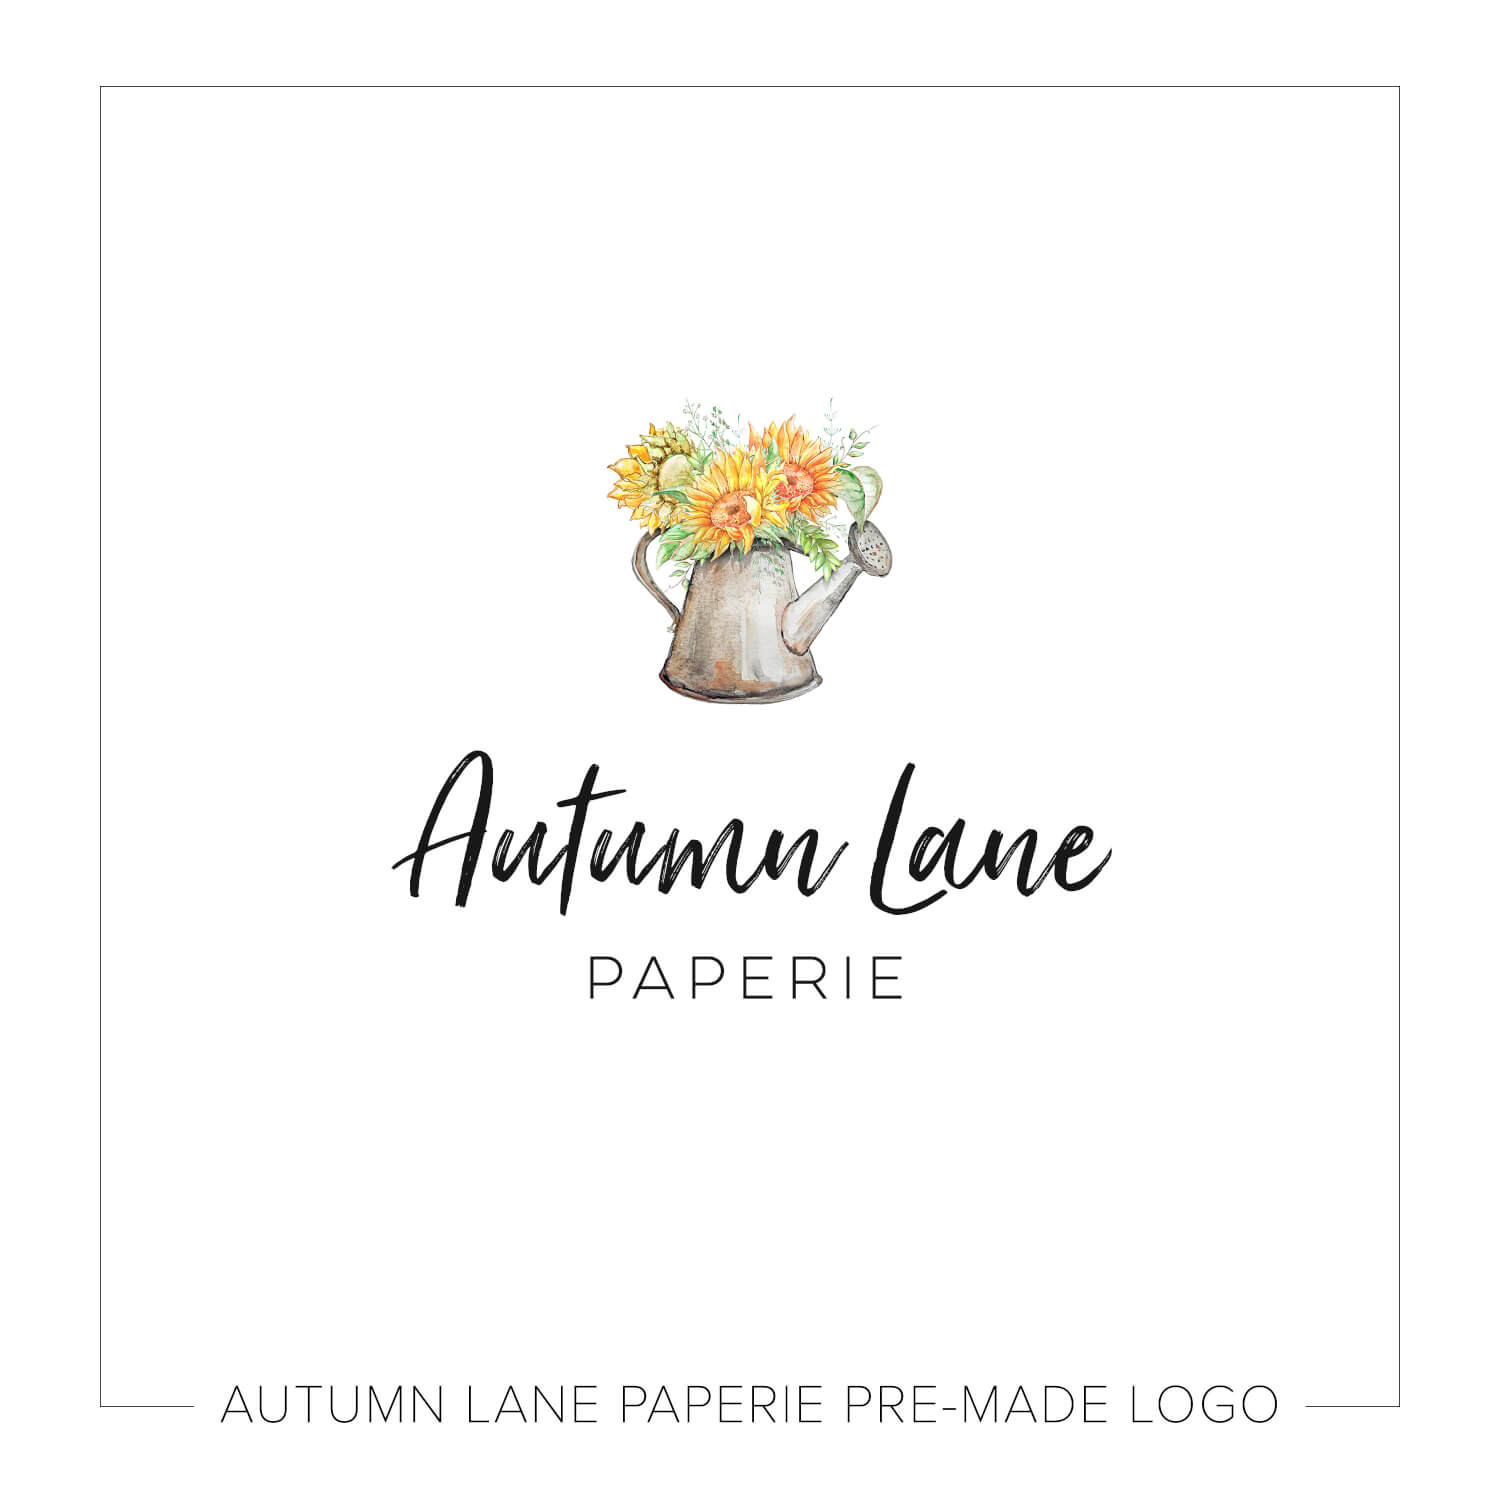 A Yellow Flower Logo - Yellow Flower Watering Can Logo J25 | Autumn Lane Paperie